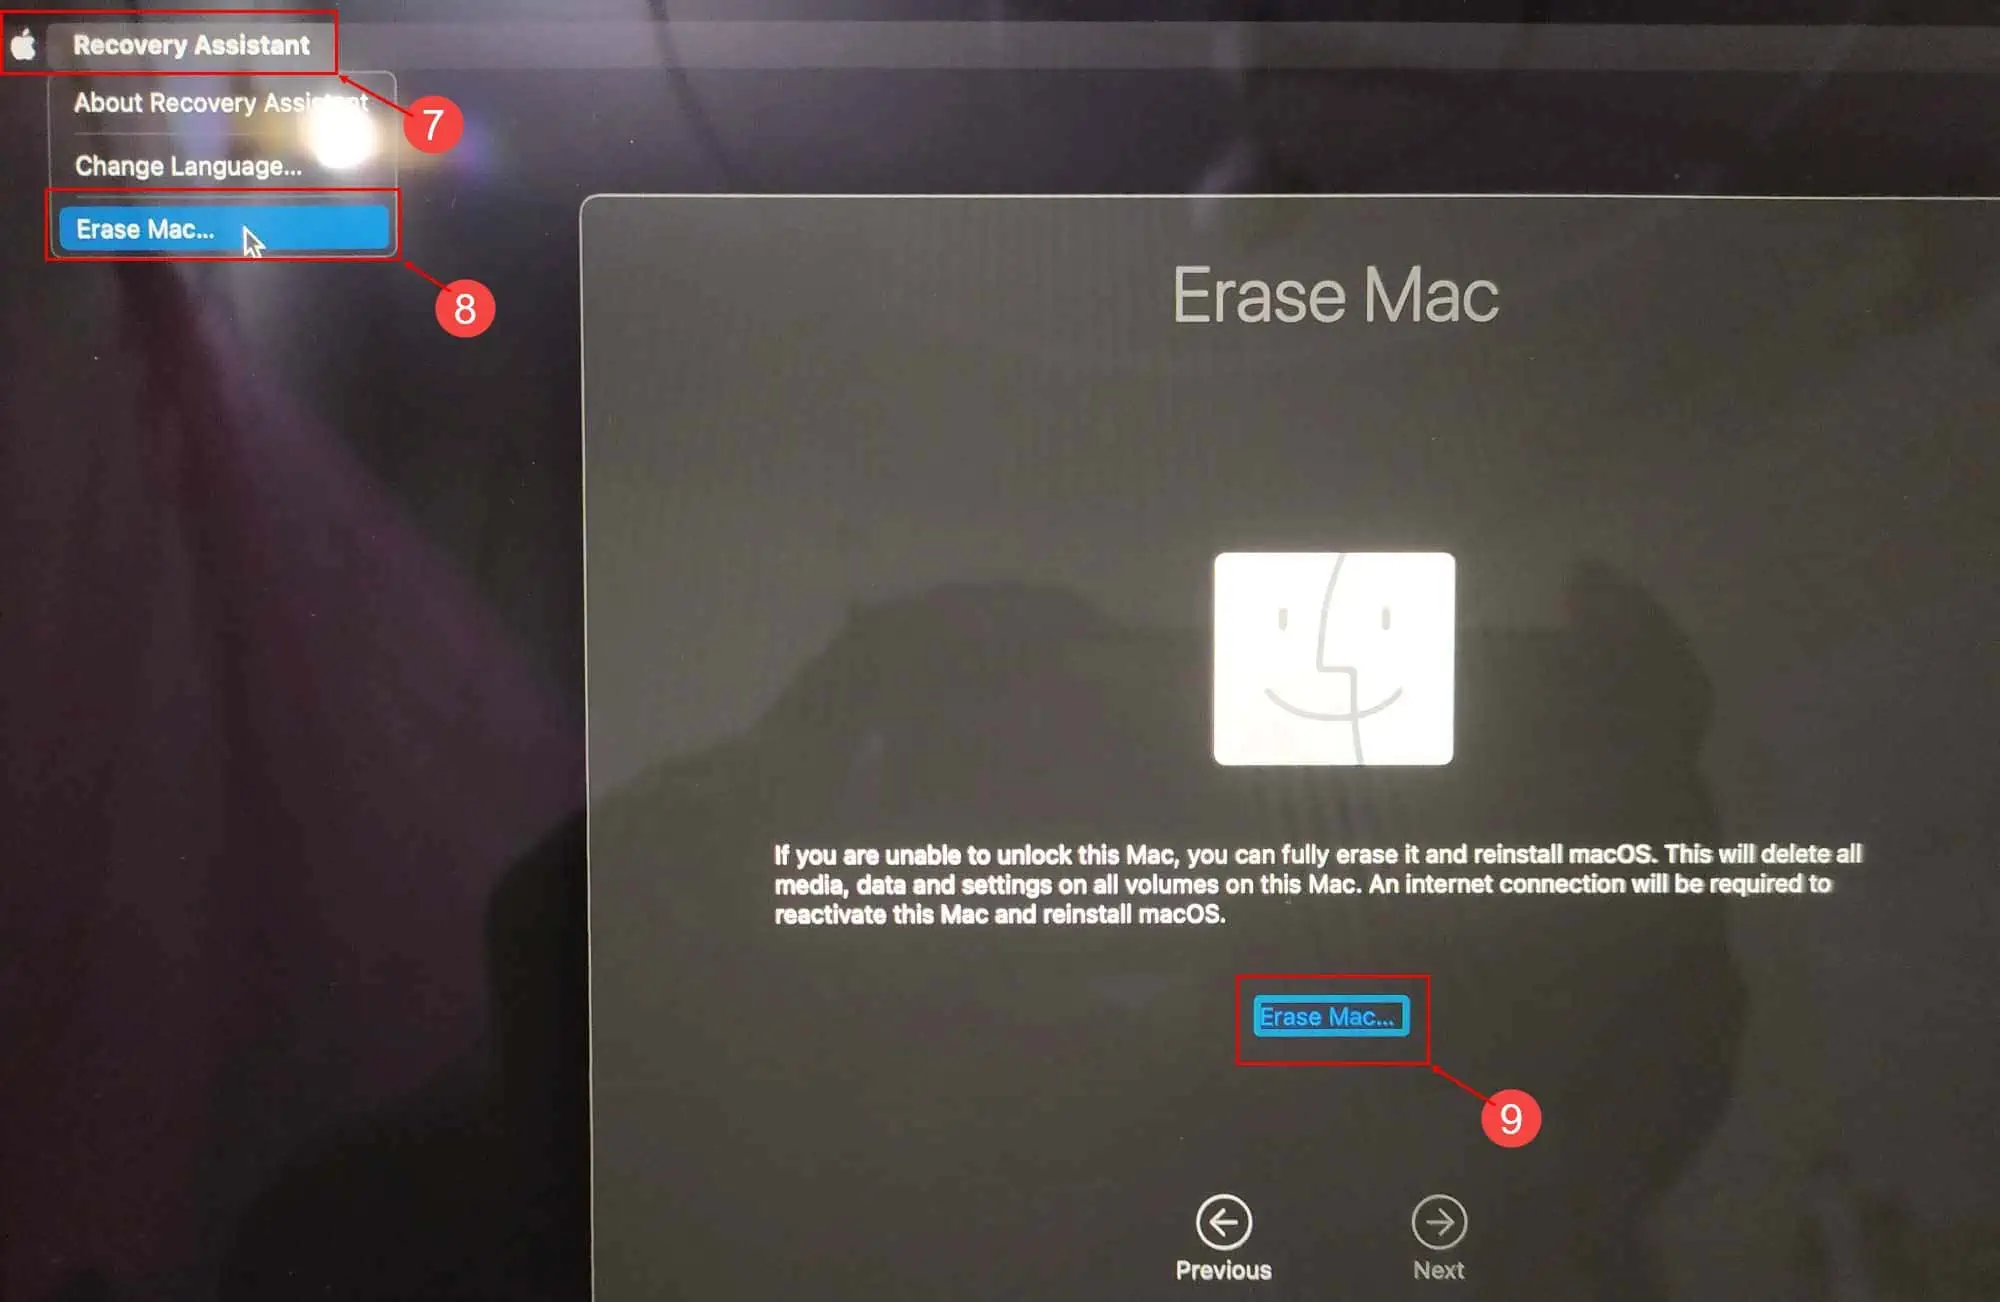 erase mac in recovery assistant